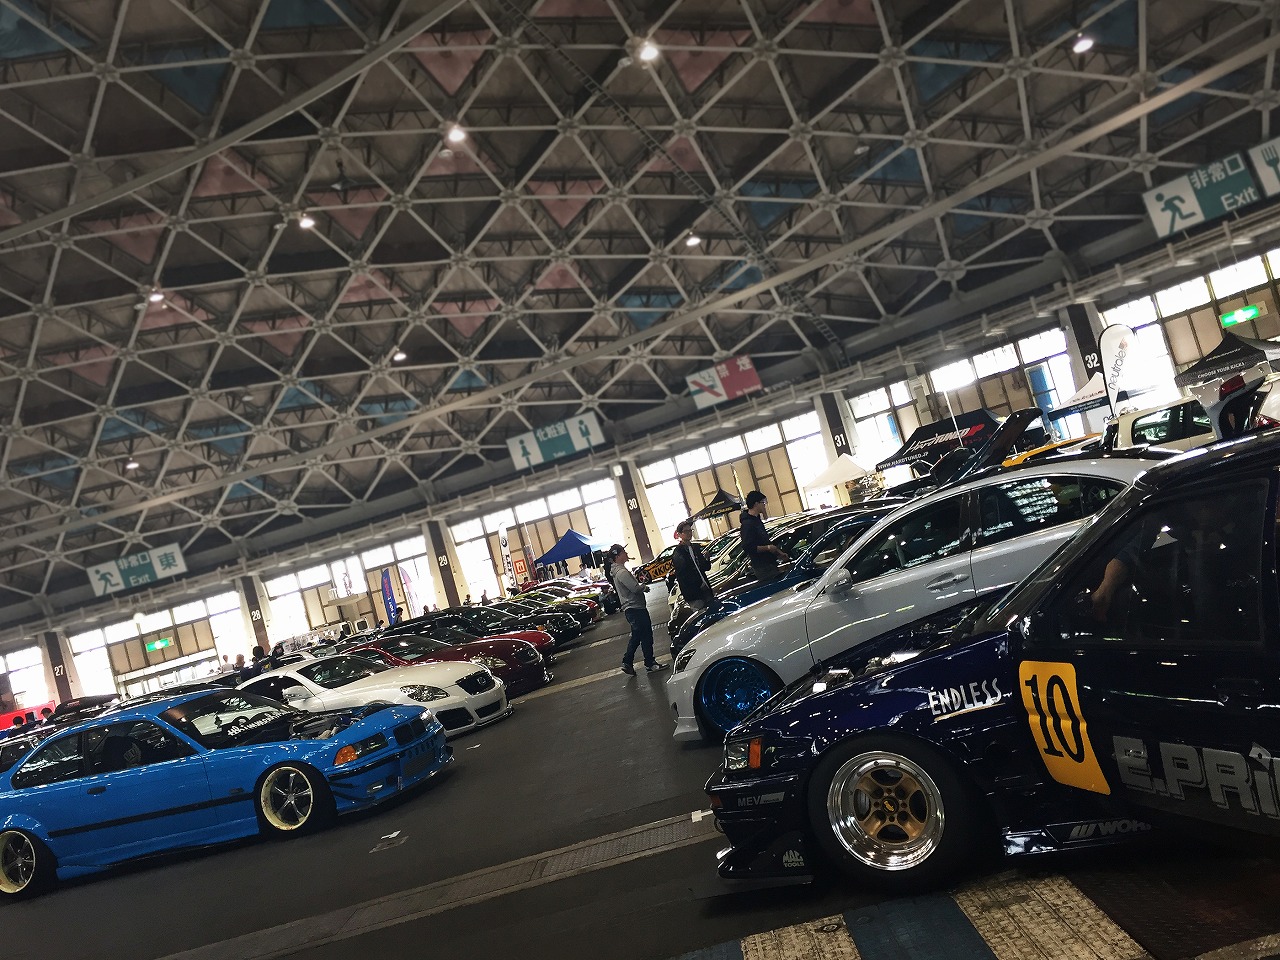 Wekfest usa 2017 japan 名古屋ポートメッセ　Air Force Suspension エアサスブース